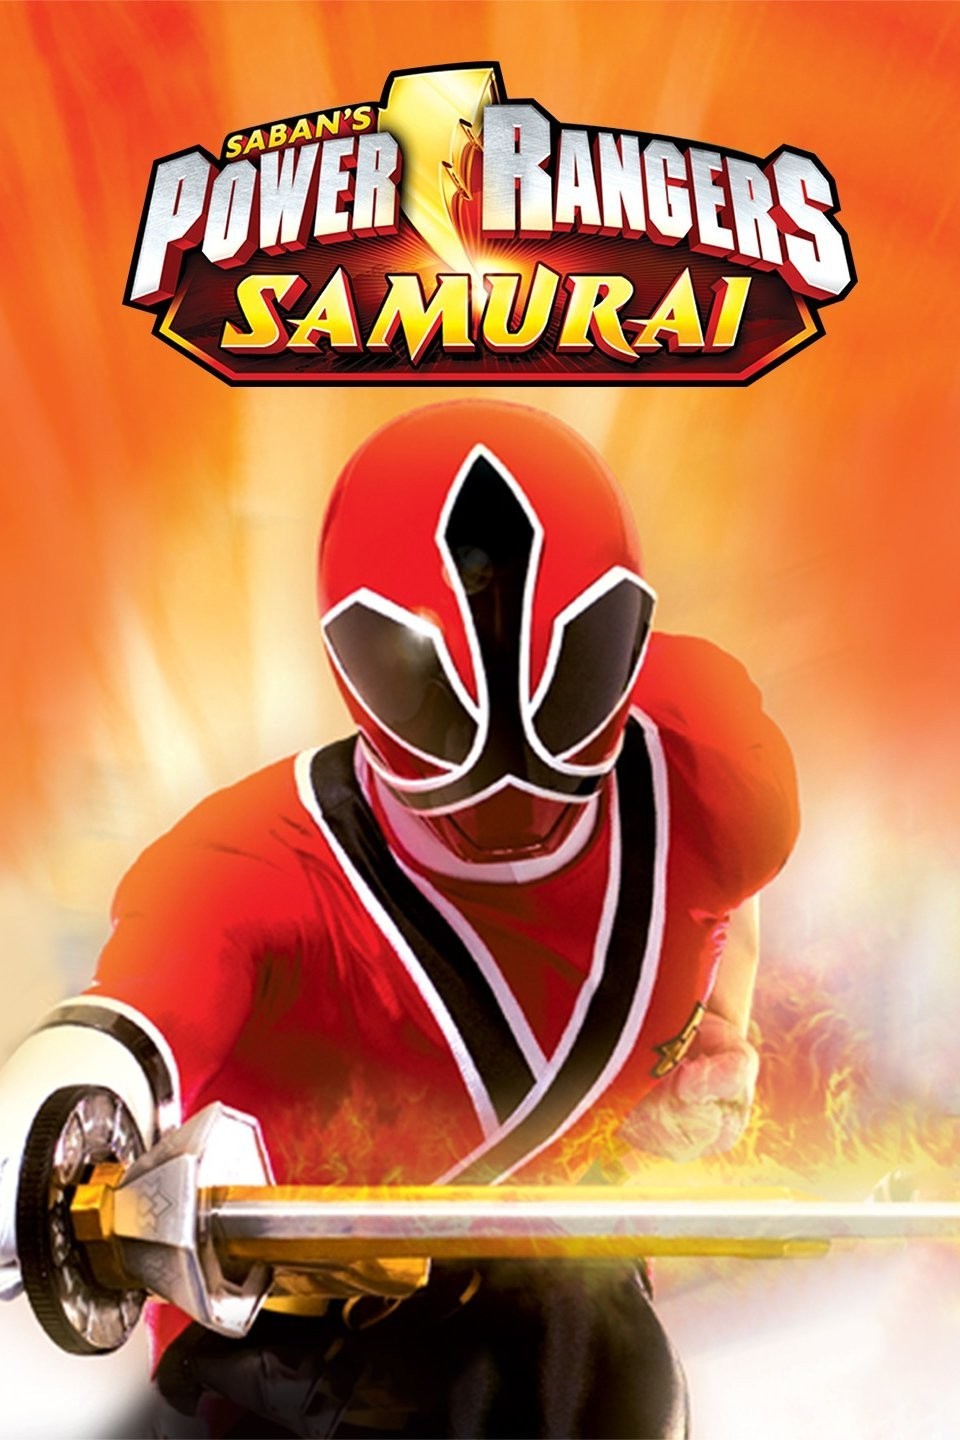 Power Rangers Samurai, Episode 5 - A Fish Out of Water 